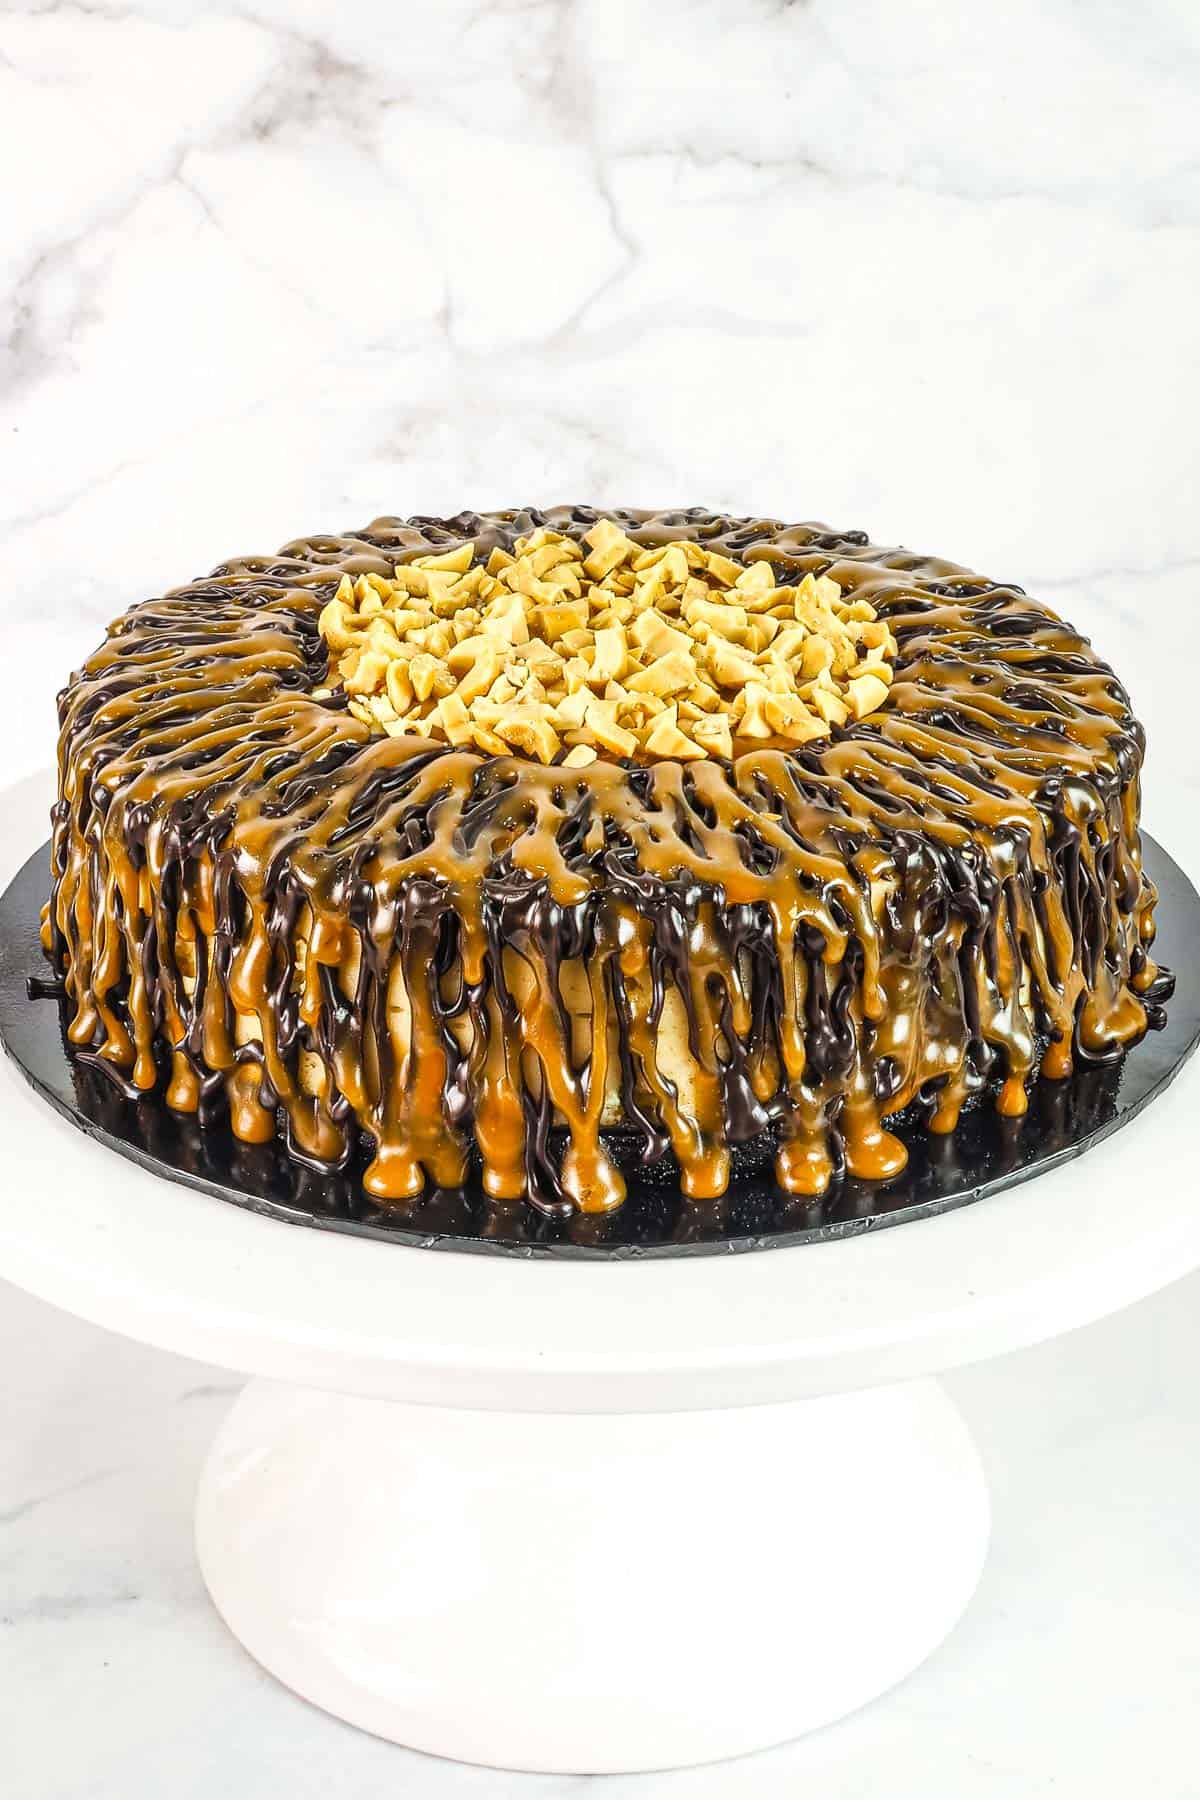 A round cheesecake with caramel and chocolate drizzle and chopped peanut center.